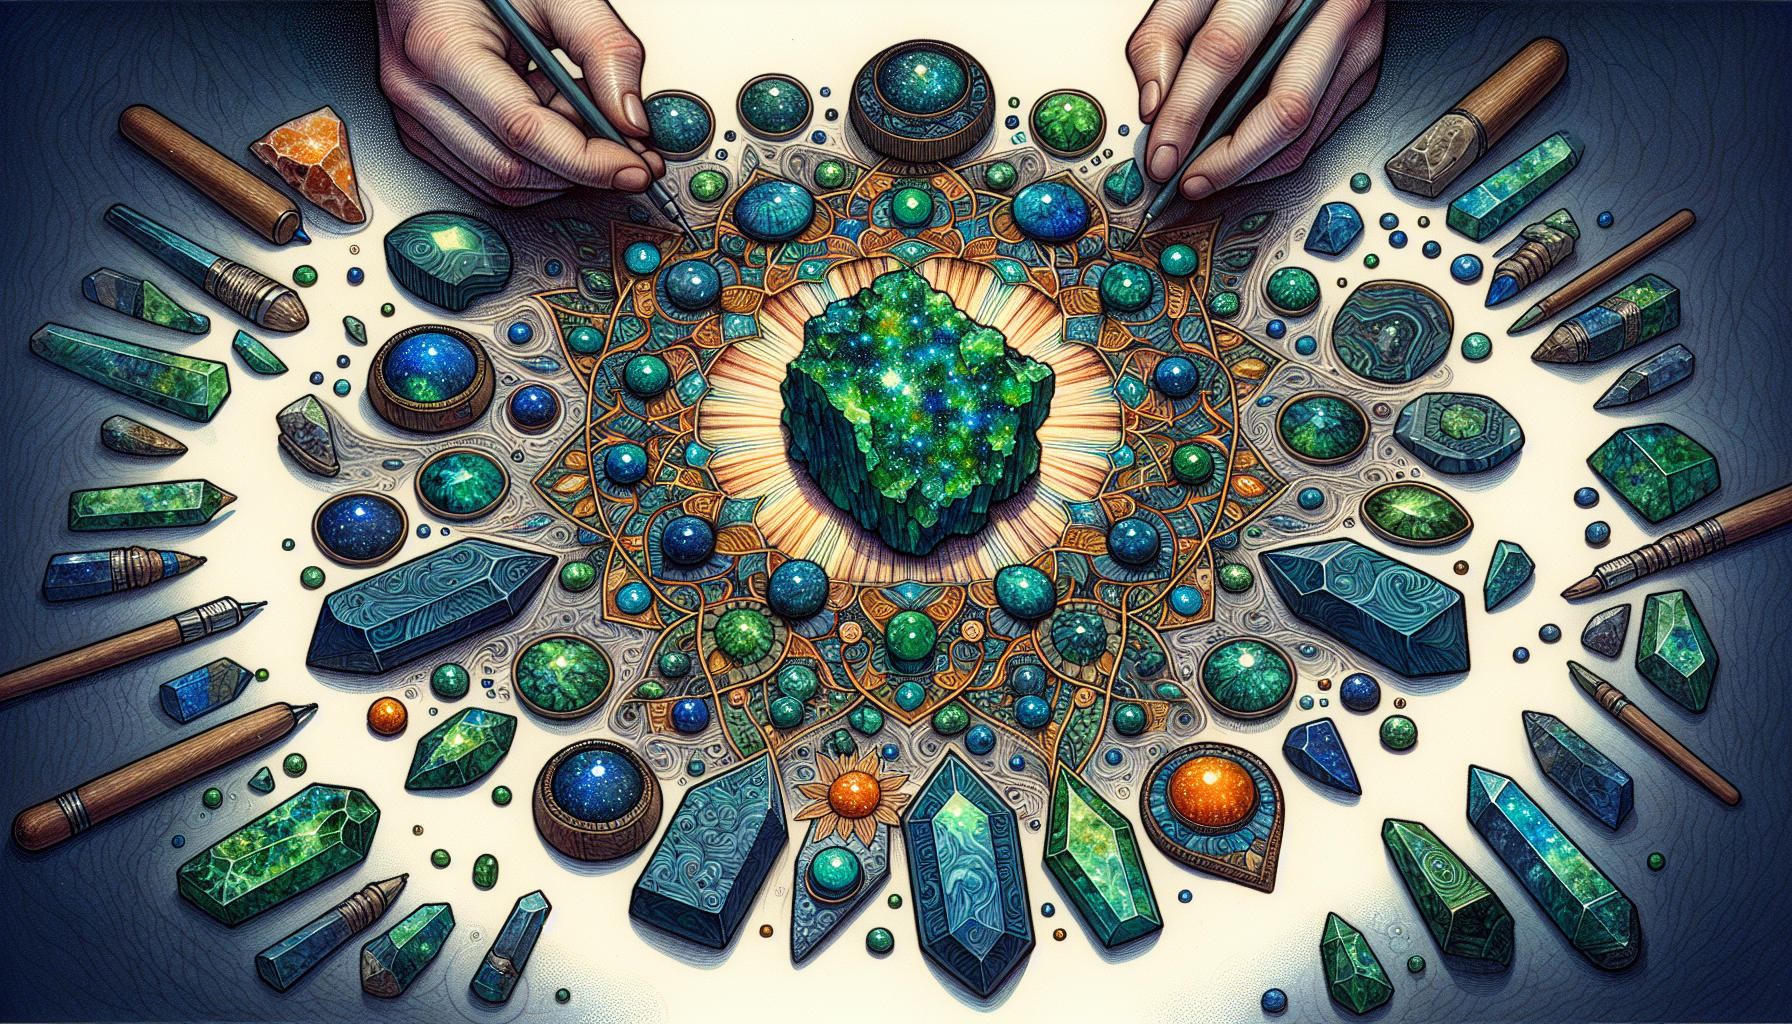 Illustration of crafting a personal amulet with moldavite and other complementary gemstones